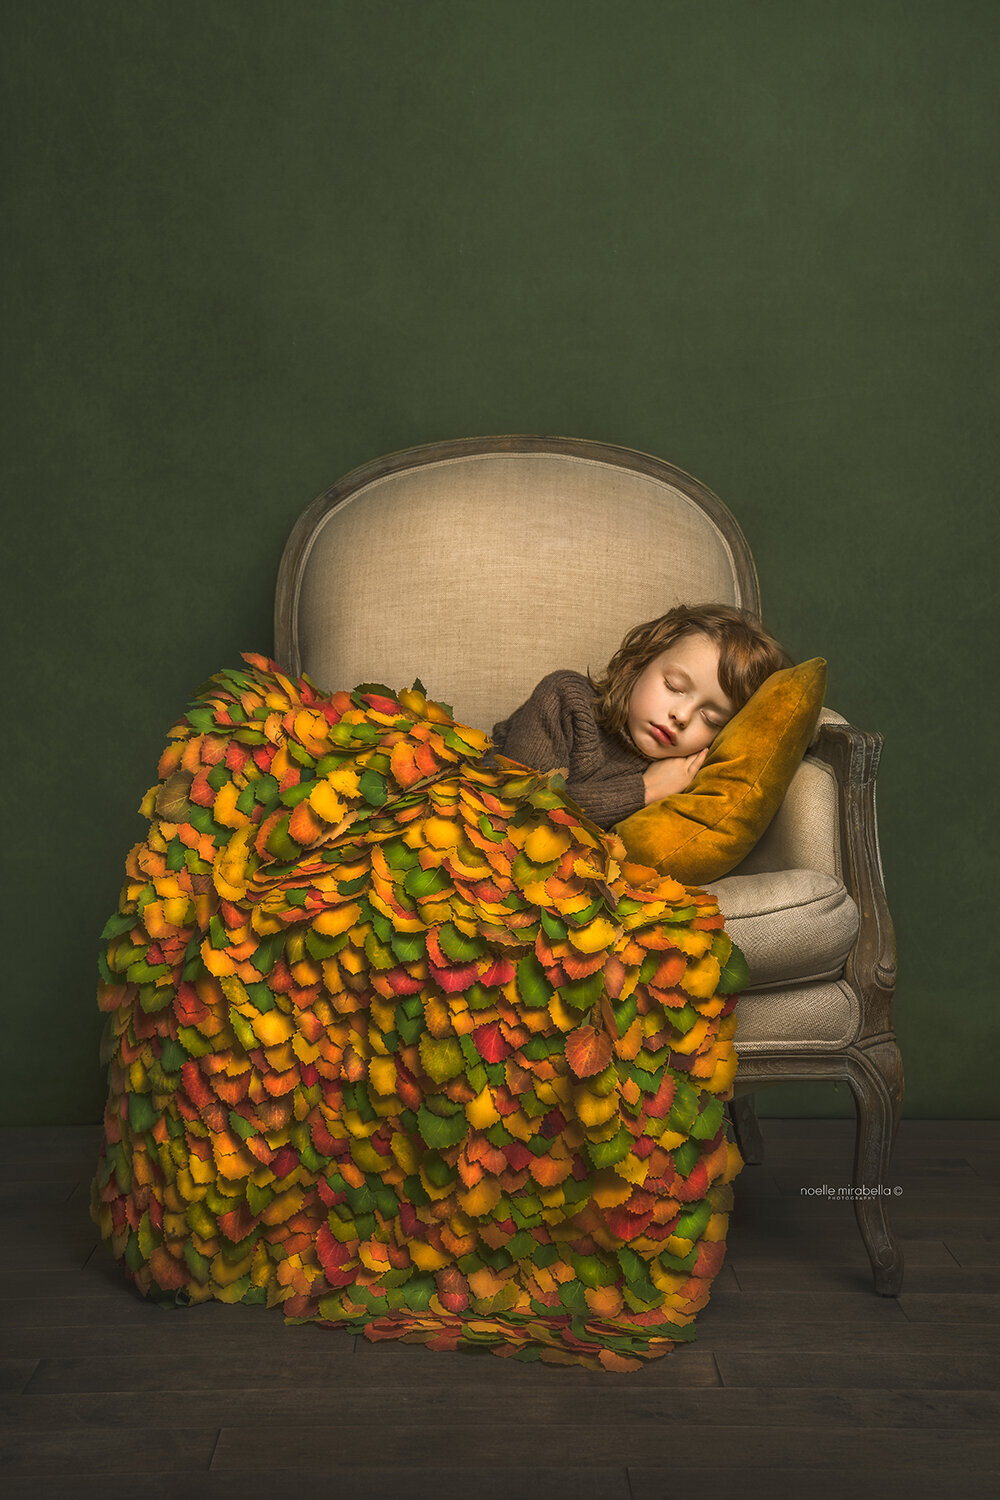 Child sleeping in chair covered in a blanket made out of leaves.